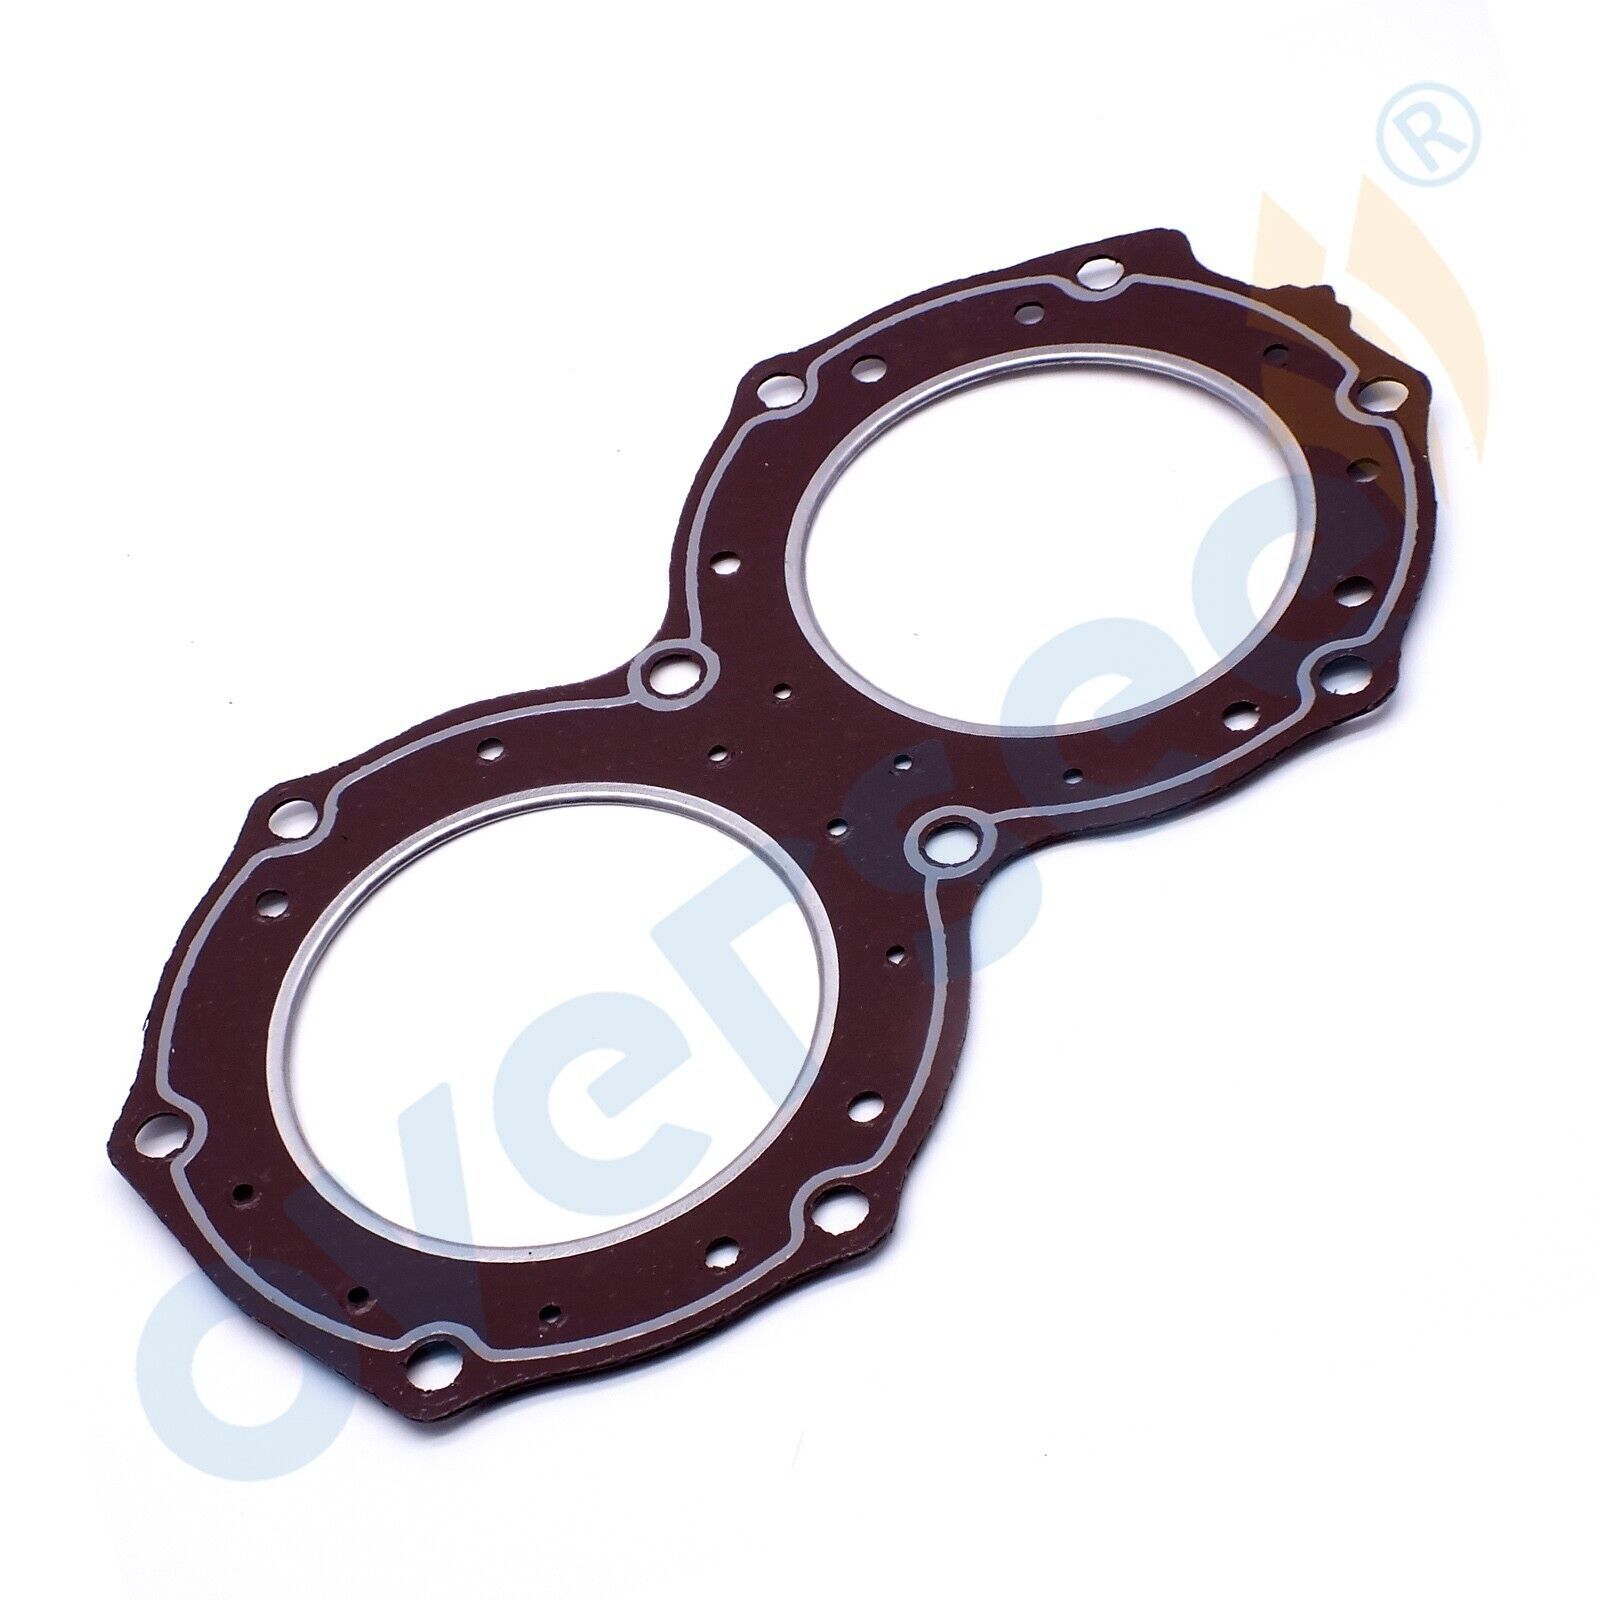 62T-W0001 Top End Gasket Kit for Yamaha and 50 similar items